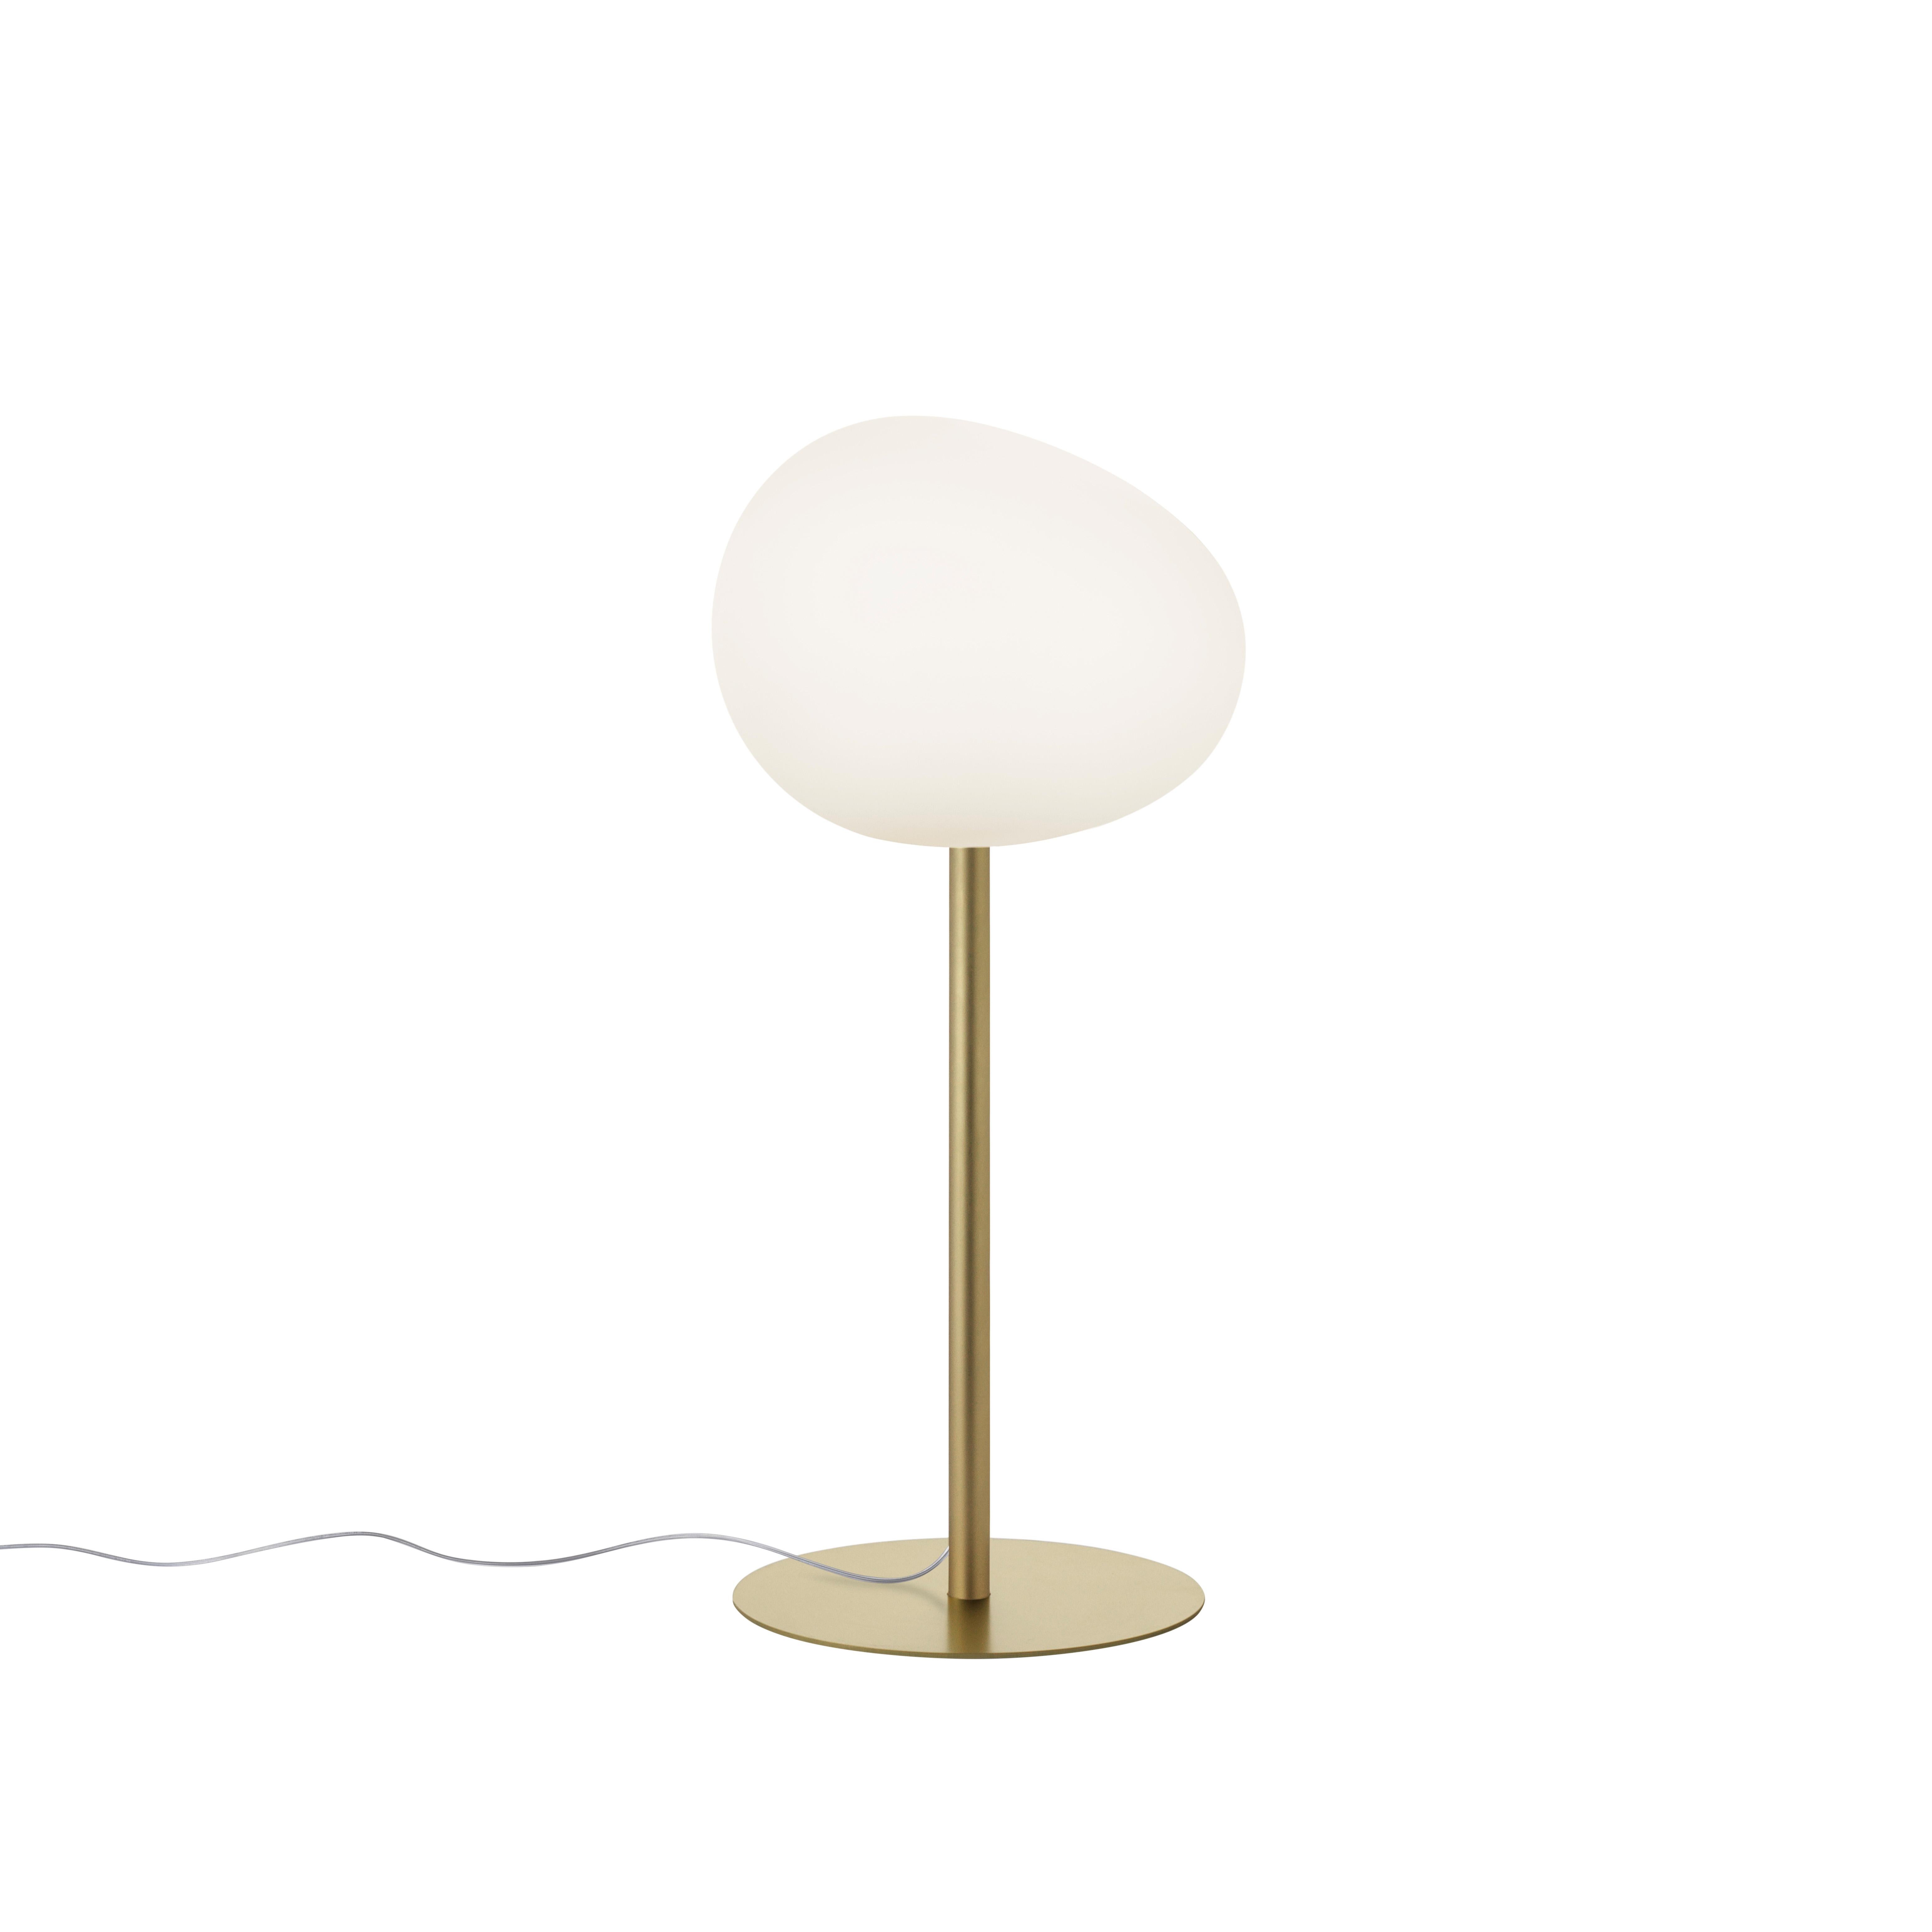 Foscarini Gregg Alta Table Lamp in White by Ludovica and Roberto Palomba In New Condition For Sale In Brooklyn, NY